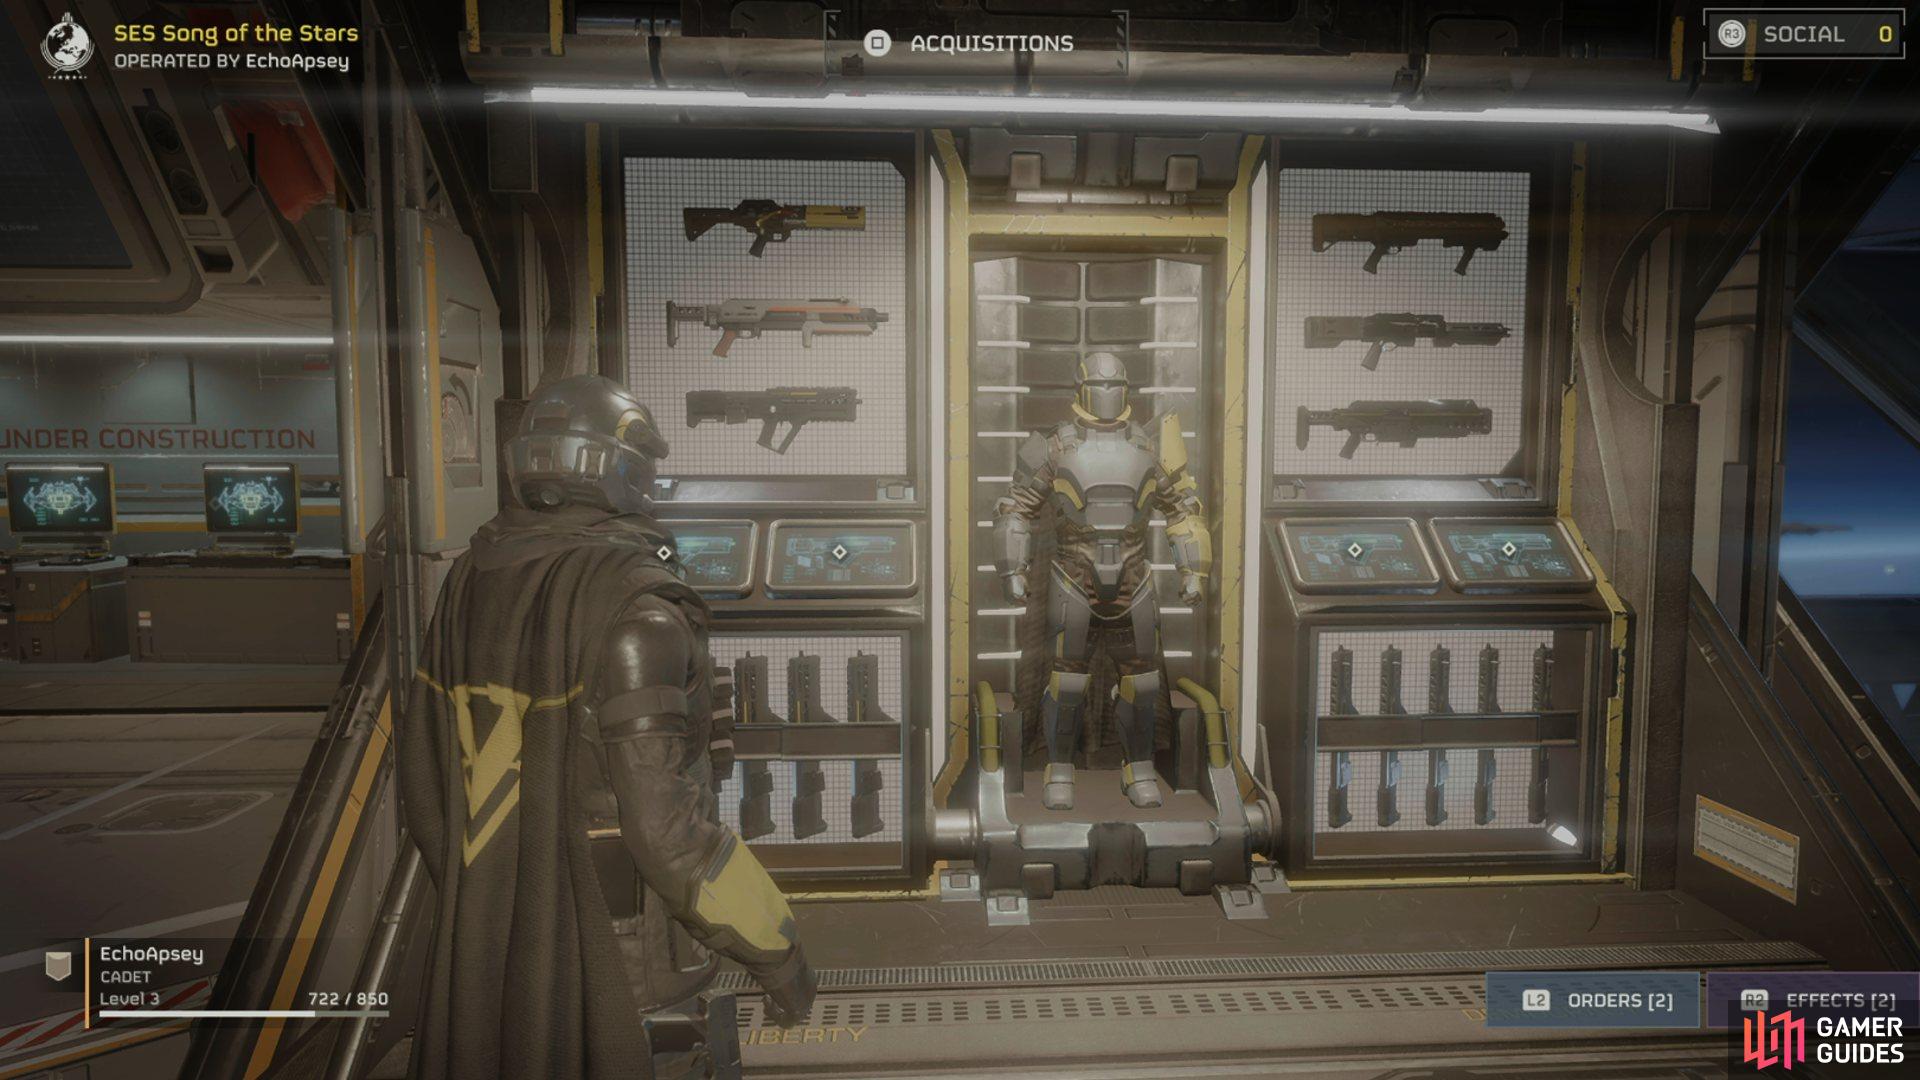 The armory can always be found on your ship after returning from a mission.